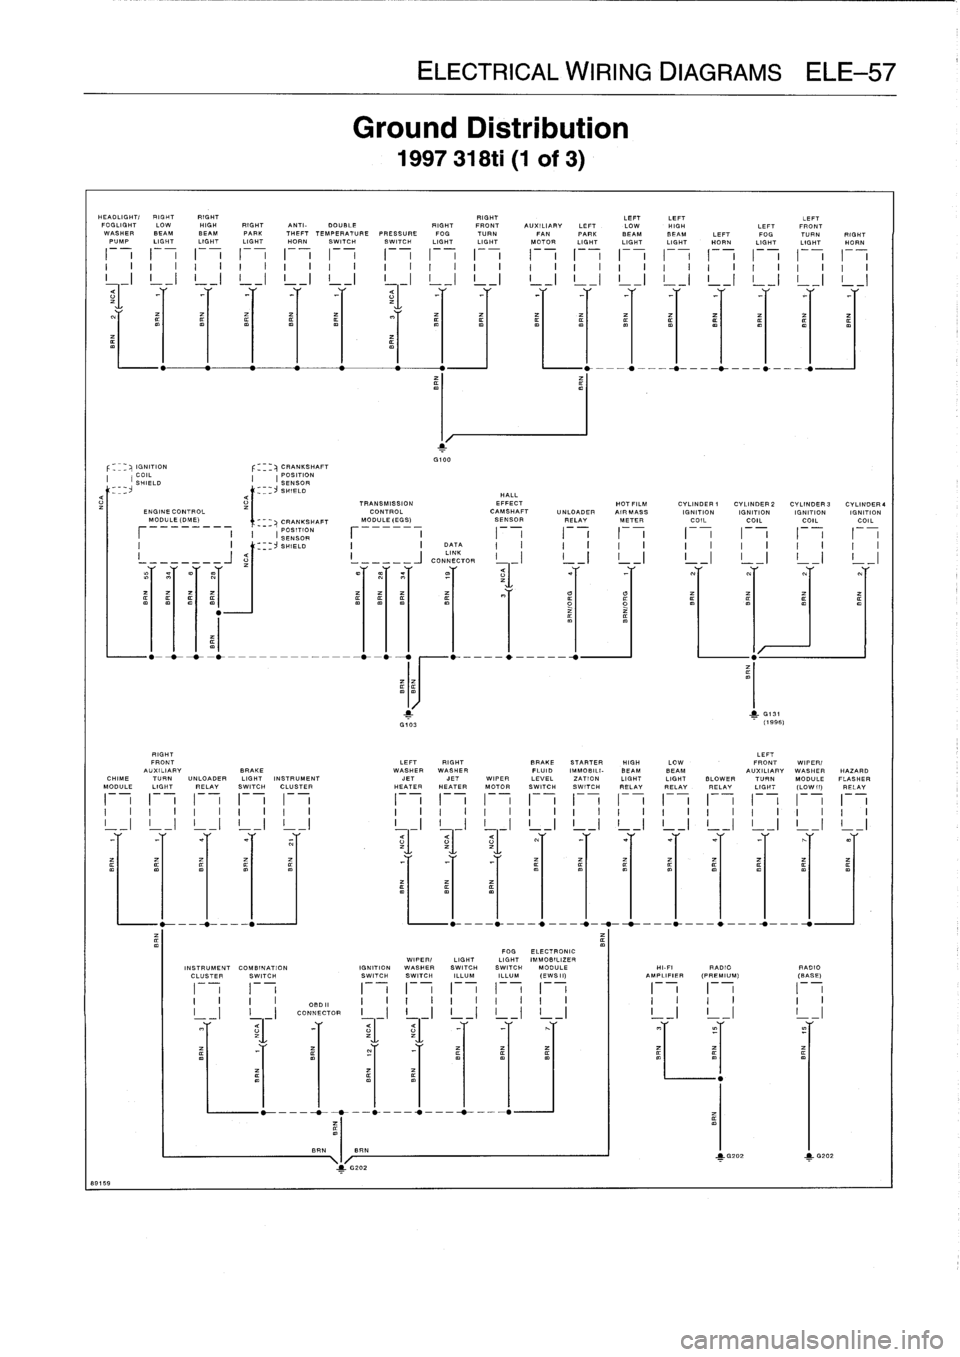 BMW 328i 1998 E36 Service Manual 
Ground
Distribution

1997
318ti
(1
of
3)

HEADLIGHT/RIGHTRIGHT

	

RIGHT

	

LEFTLEFT

	

LEFT

89159

FOGLIGHT
LOW
HIGH
RIGHT
ANTI-
DOUBLE

	

RIGHT
FRONT
AUXILIARY
LEFT
LOW
HIGH

	

LEFT
FRONT
WASH